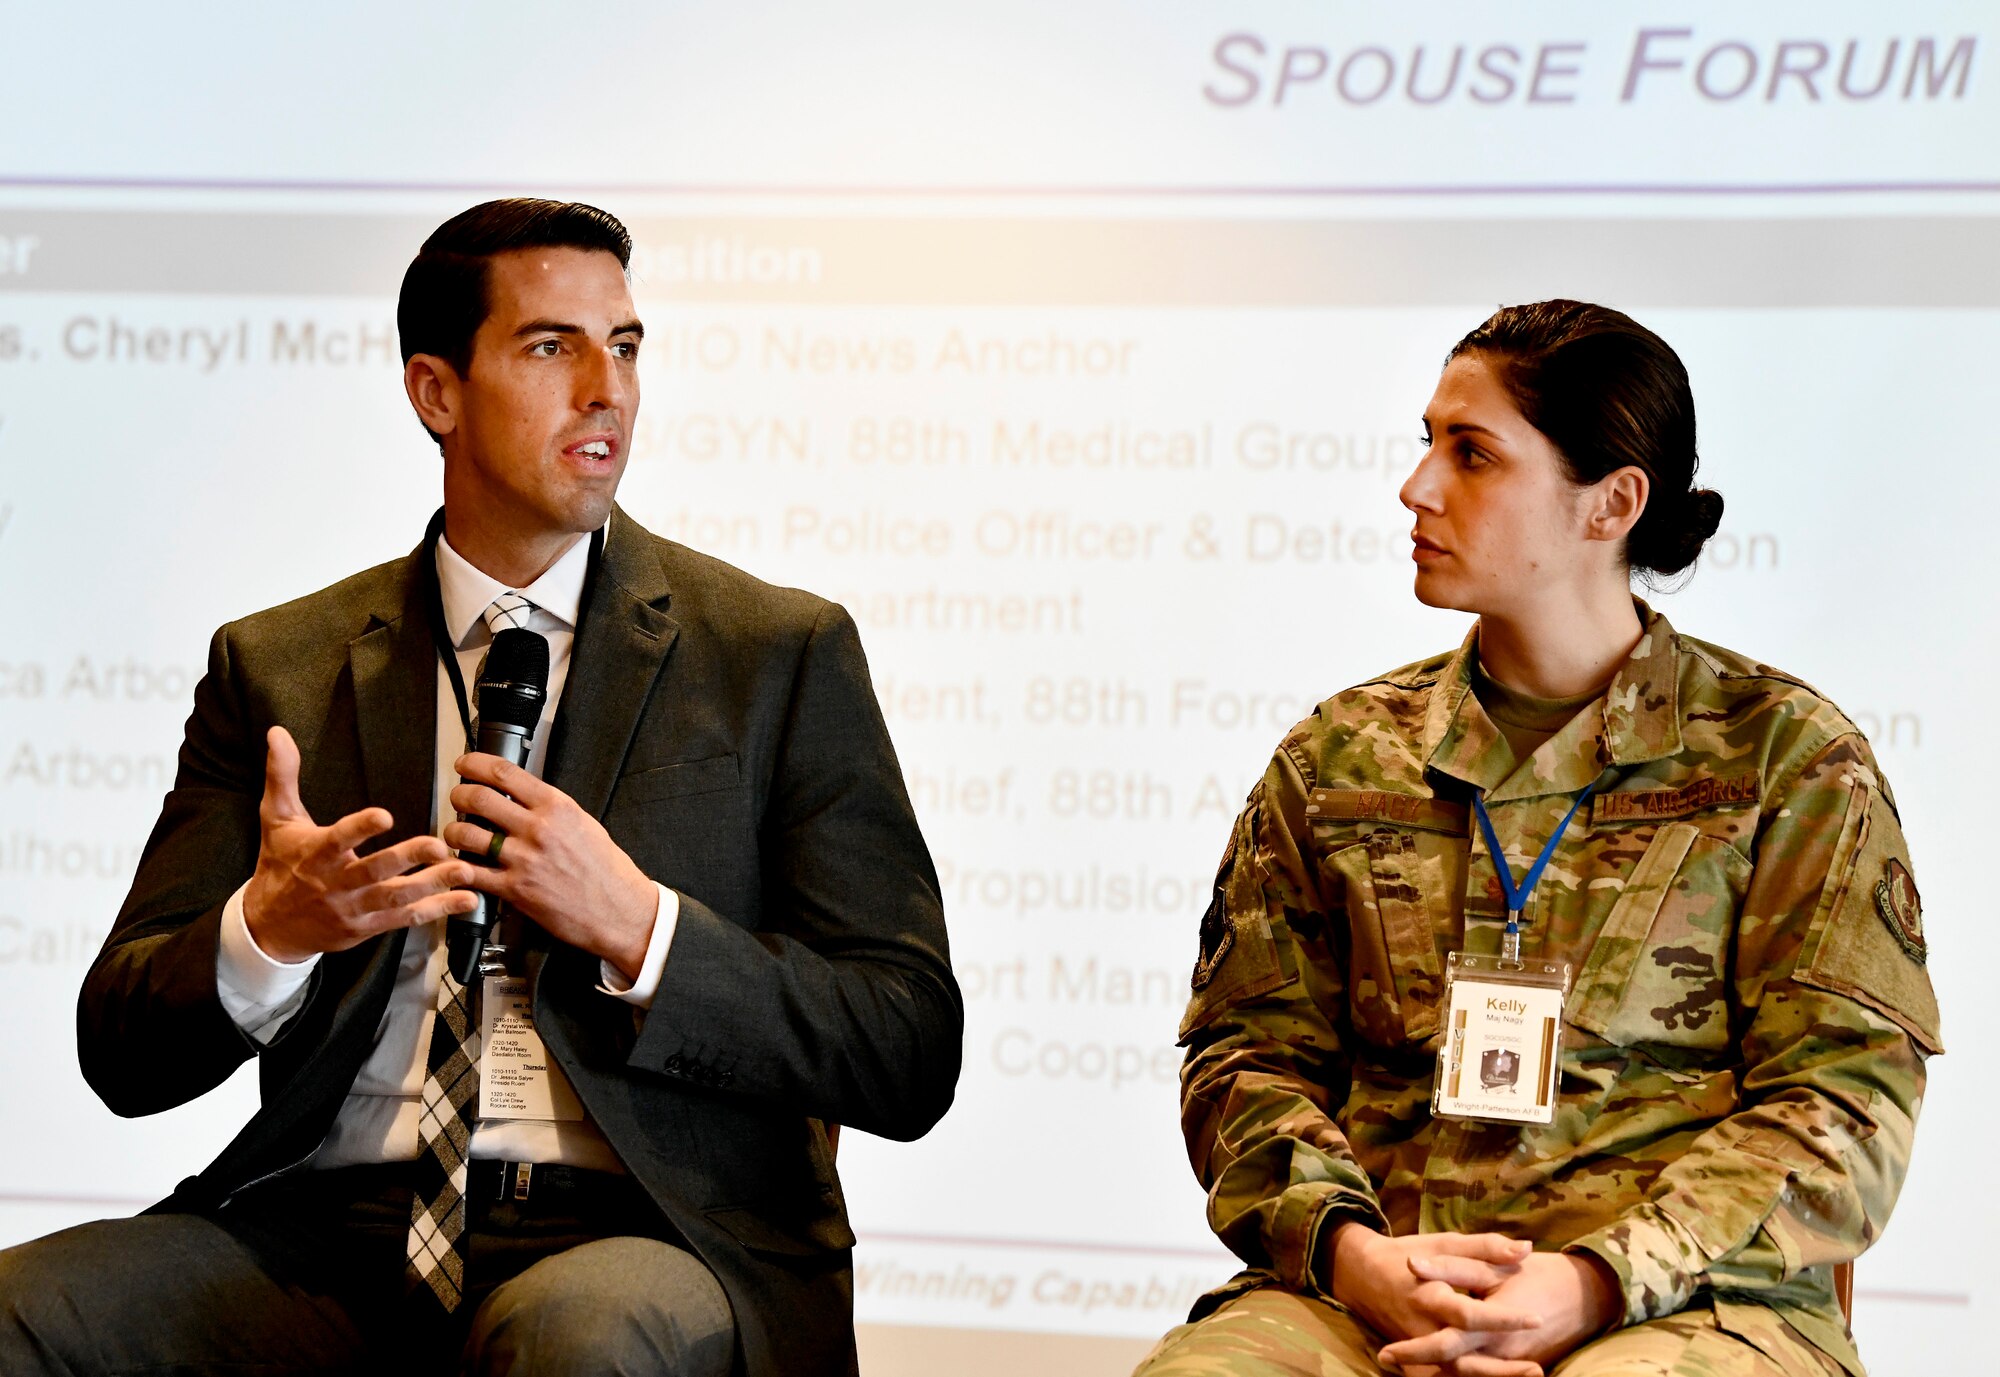 Maj. Kelly Nagy and her spouse, Ross Nagy participate in a spouse forum during the inaugural Air Force Materiel Command Women's Leadership Symposium, Nov. 13-14. The two-day event drew more than 250 attendees from across the command, with keynote speakers, issue-focused panels and collaborative networking discussions designed to empower women to help foster workplace environments that embrace diversity and promote leadership growth throughout the organization.